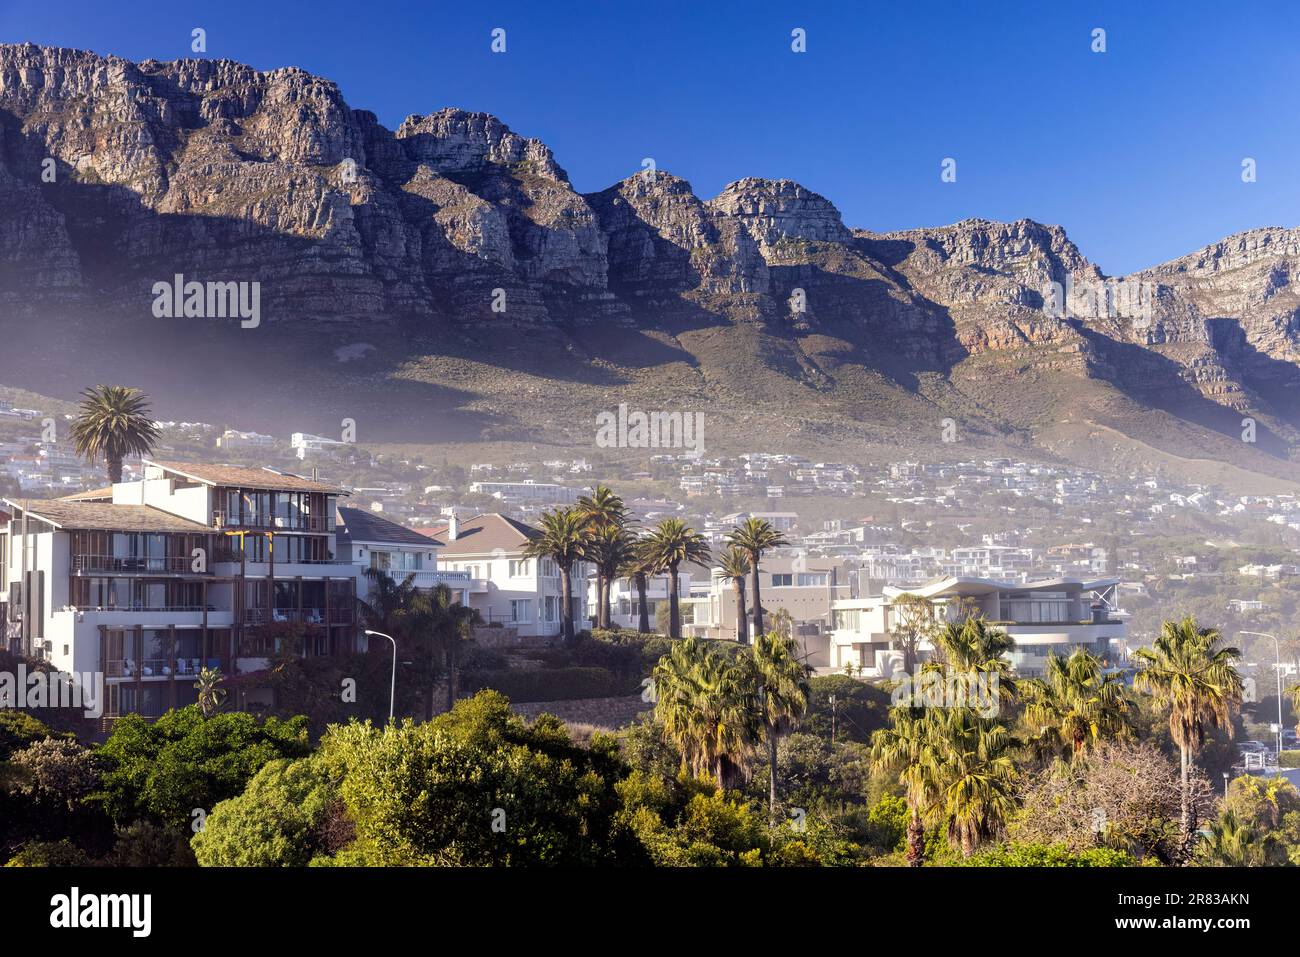 View of Camps Bay with Twelve Apostles in the background - Cape Town, South Africa Stock Photo